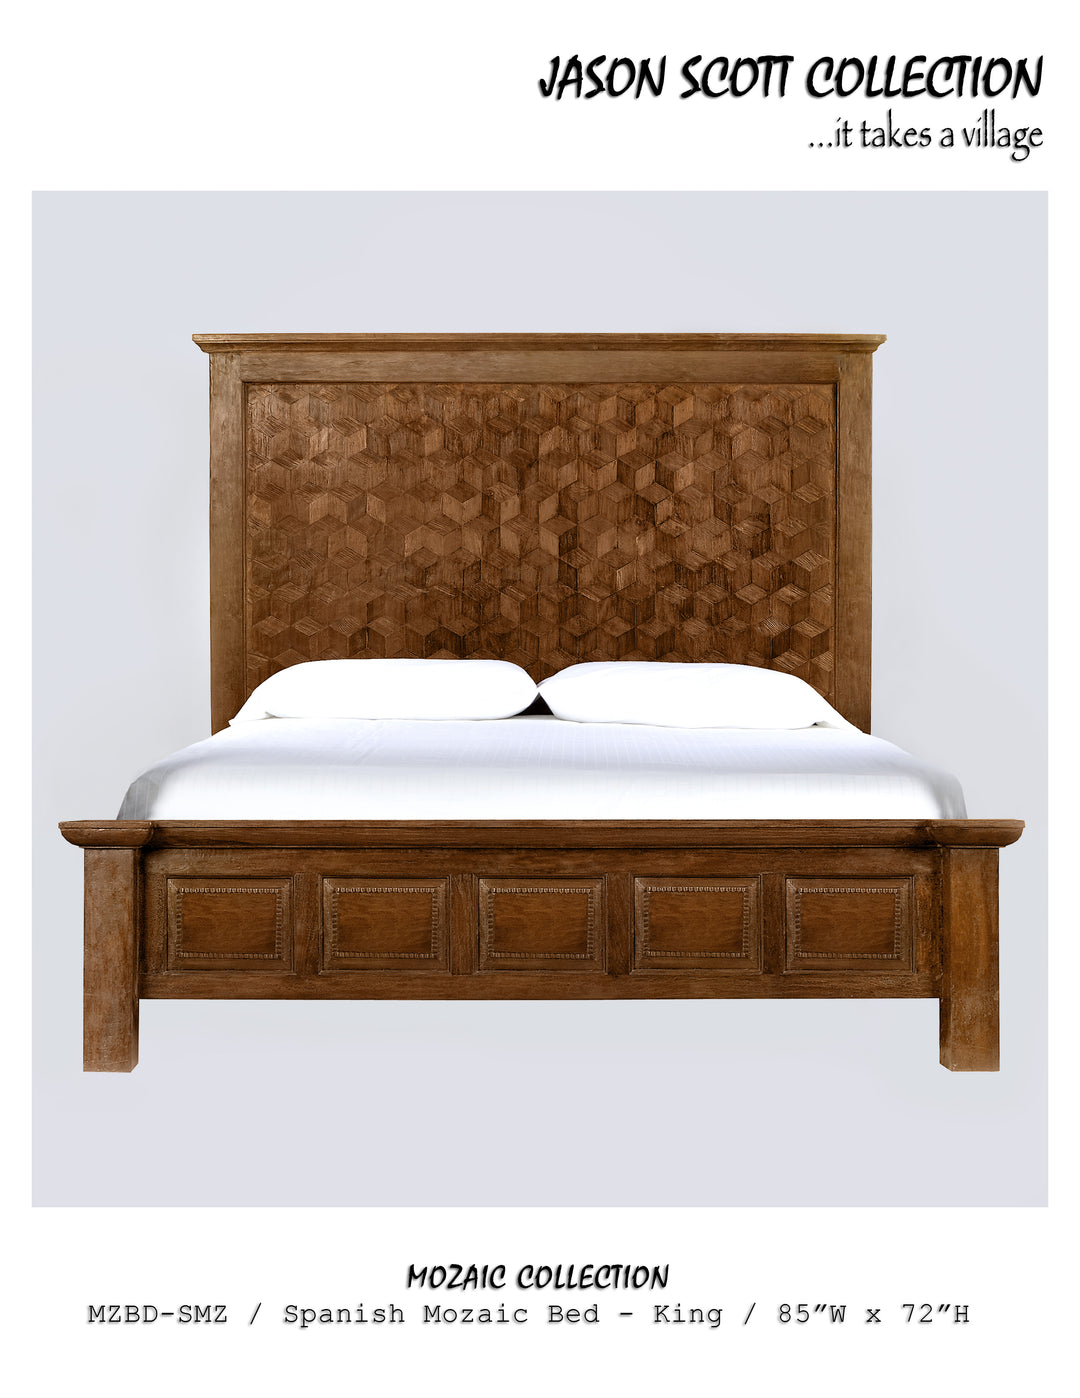 Spanish Mozaic Bed (Mozaic Collection)